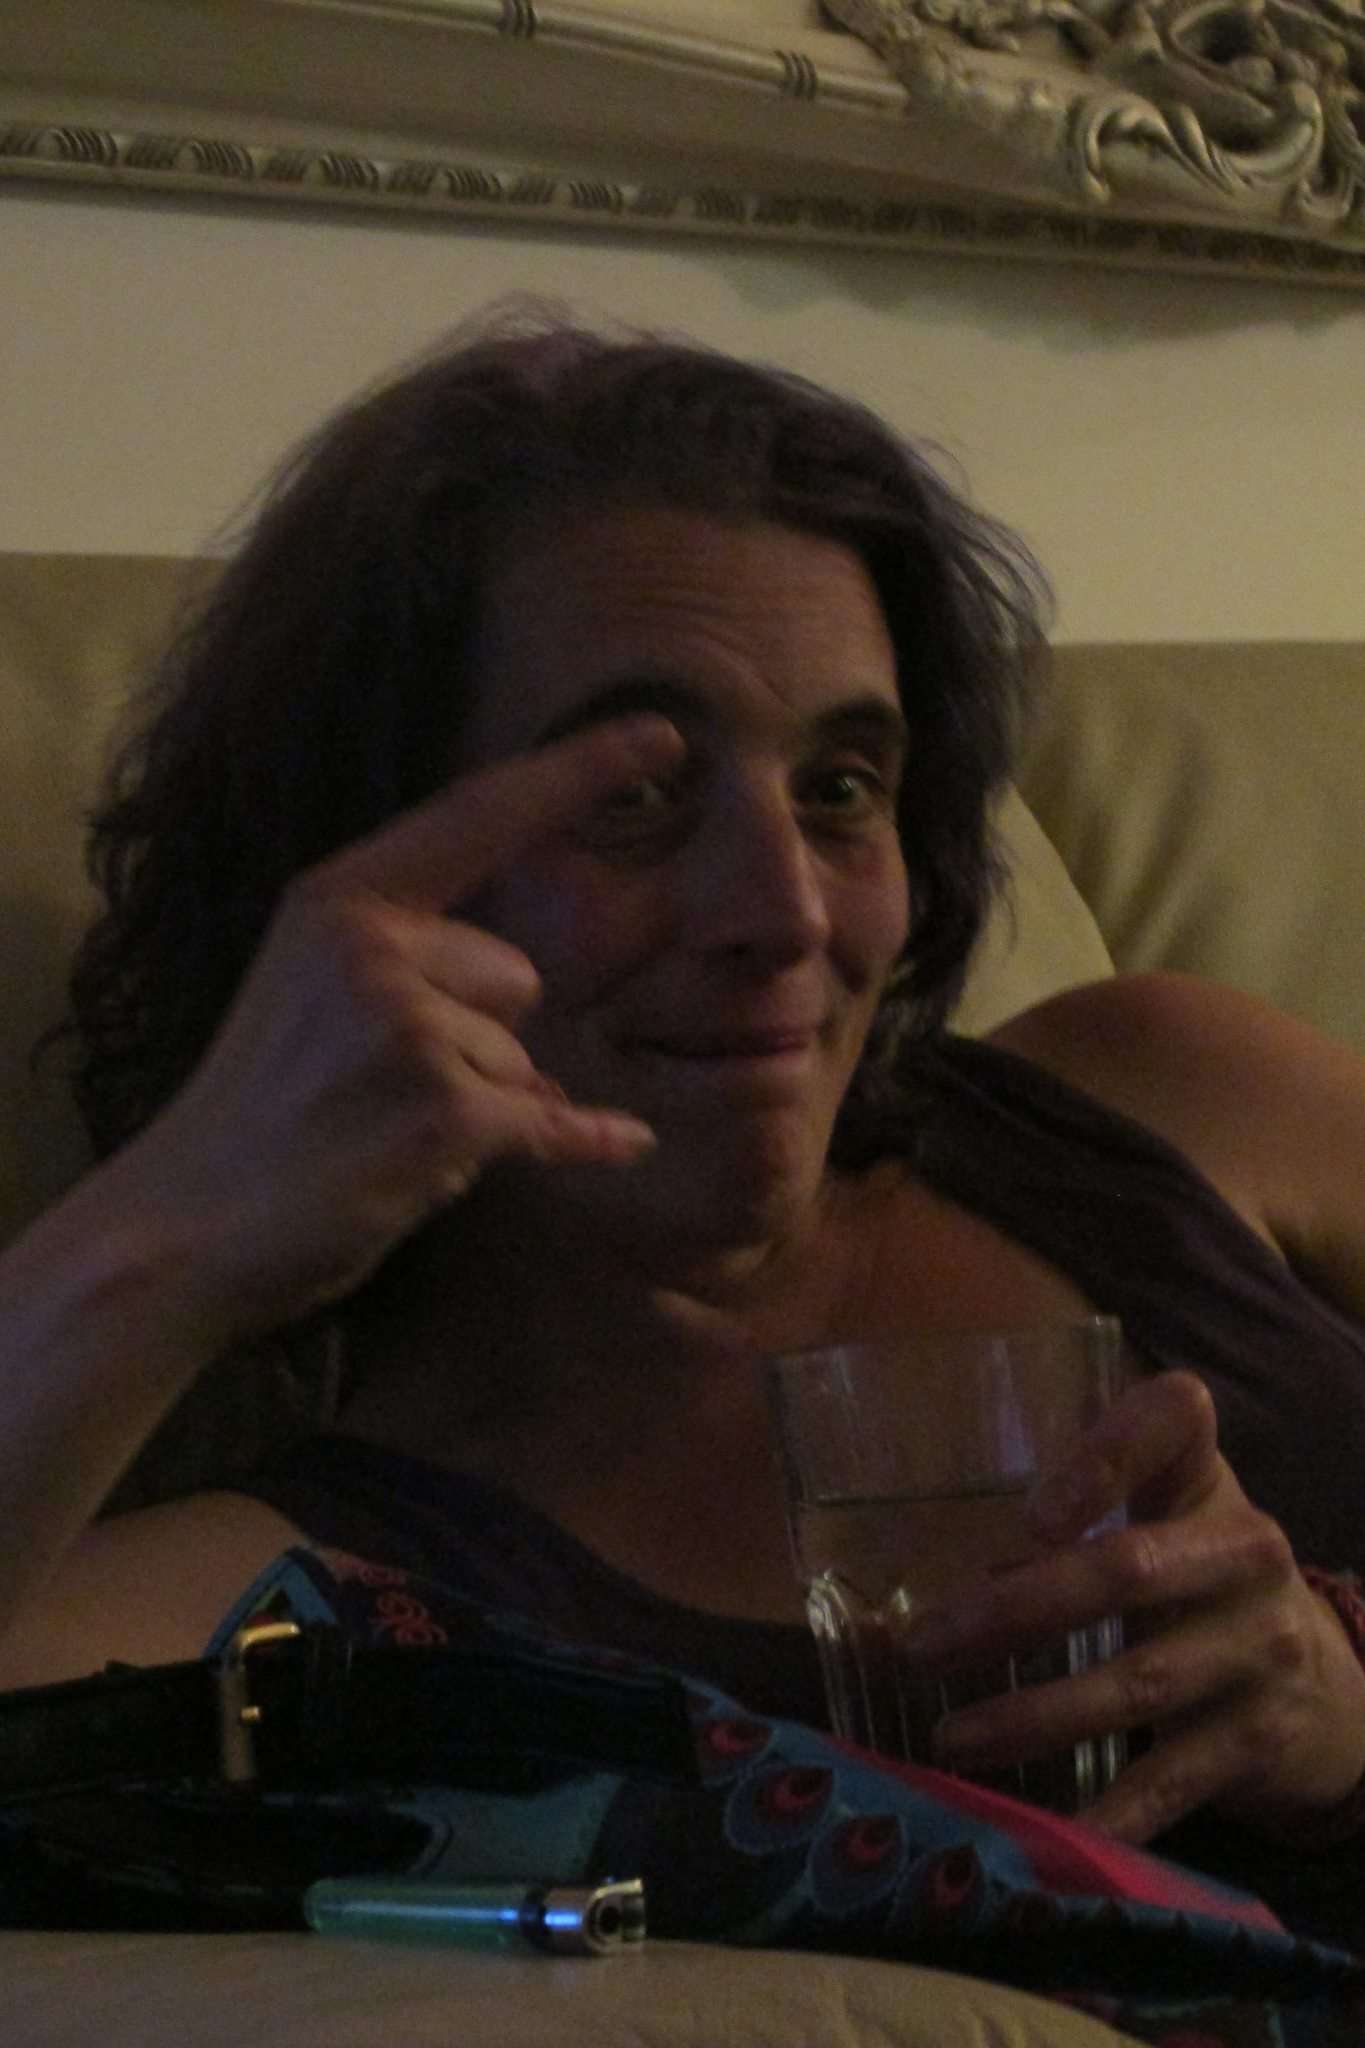 Esther with a glass of something alcoholic in her hand, her lighter to the side of her, and she's making the rock horns symbol with her hand. She is trying to smile but looks drunk.